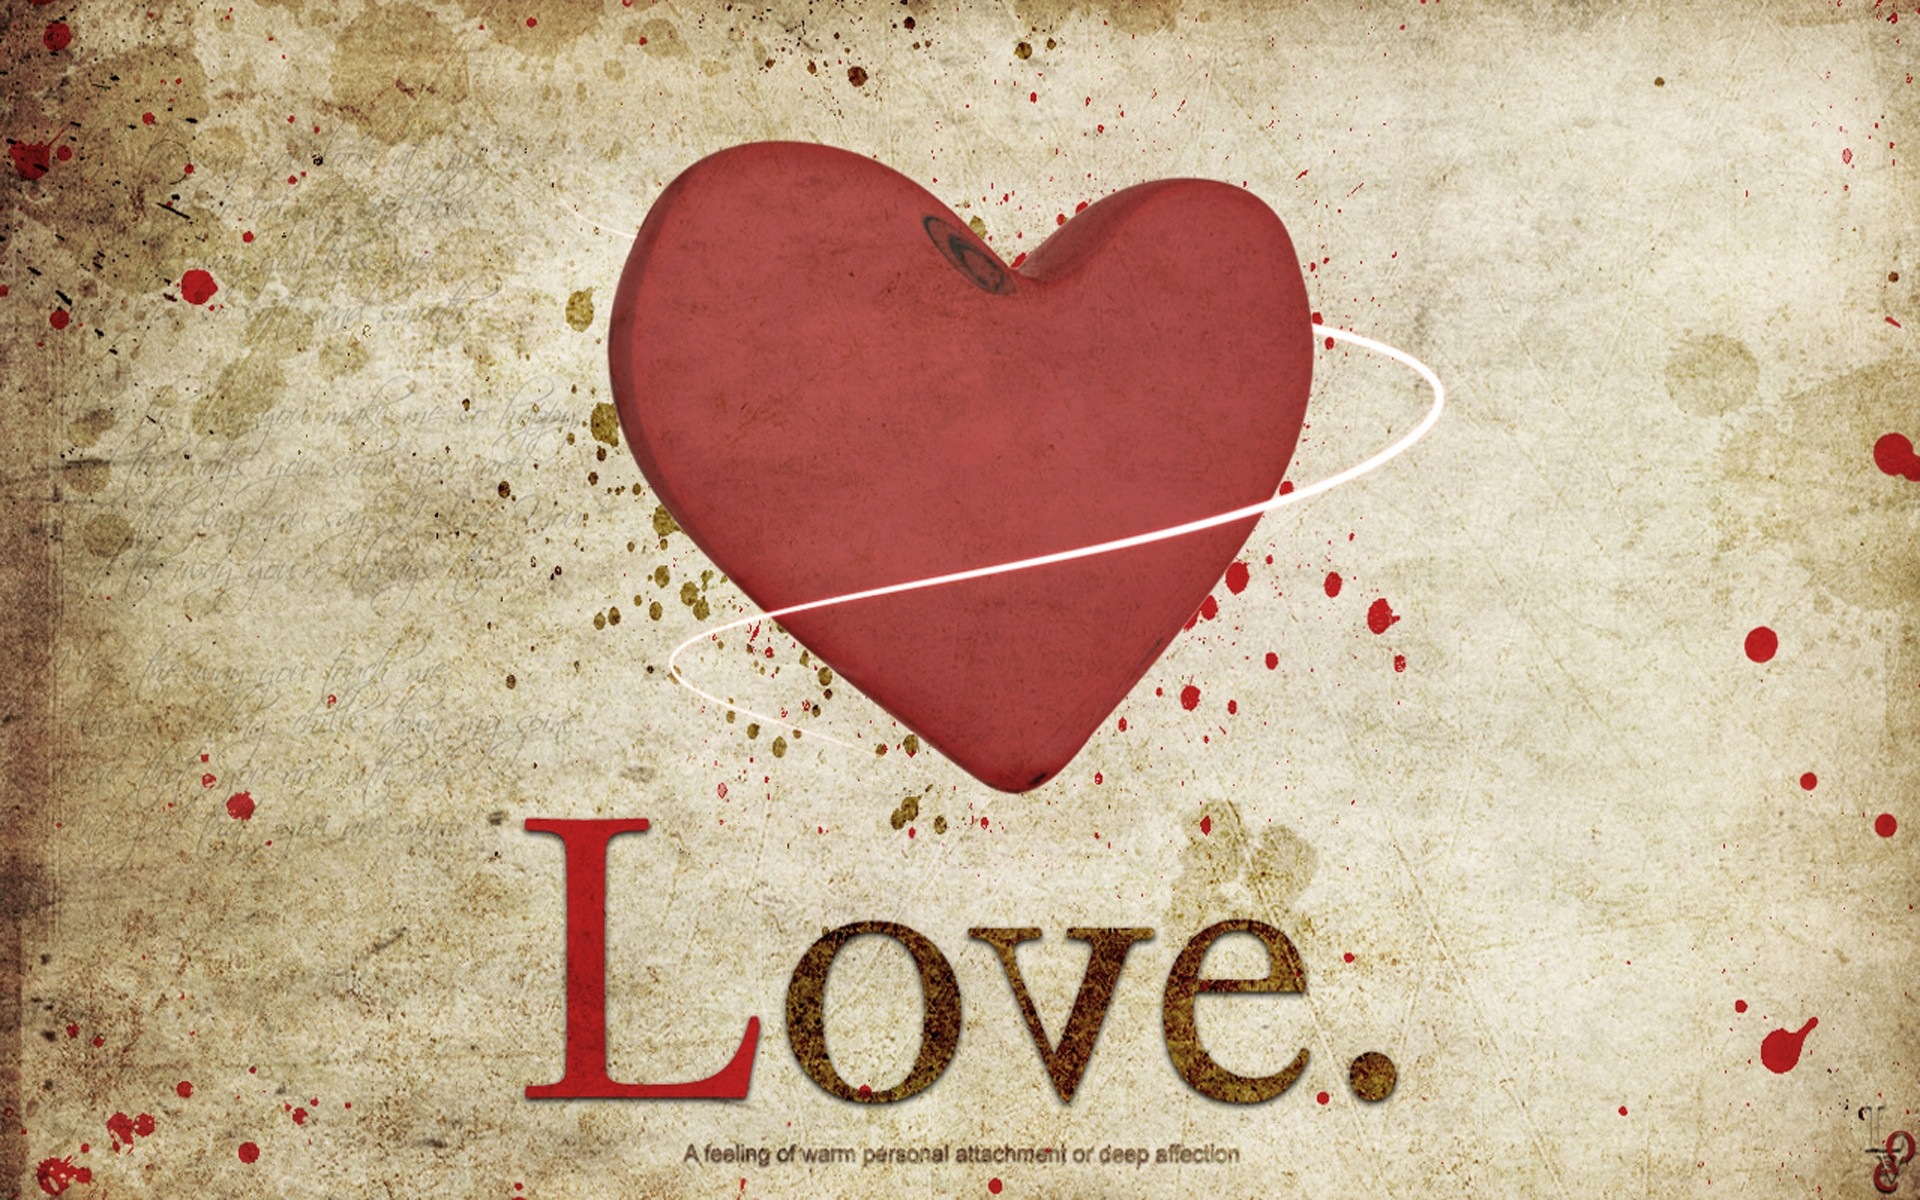 The theme of love, creative heart-shaped HD wallpapers #16 - 1920x1200